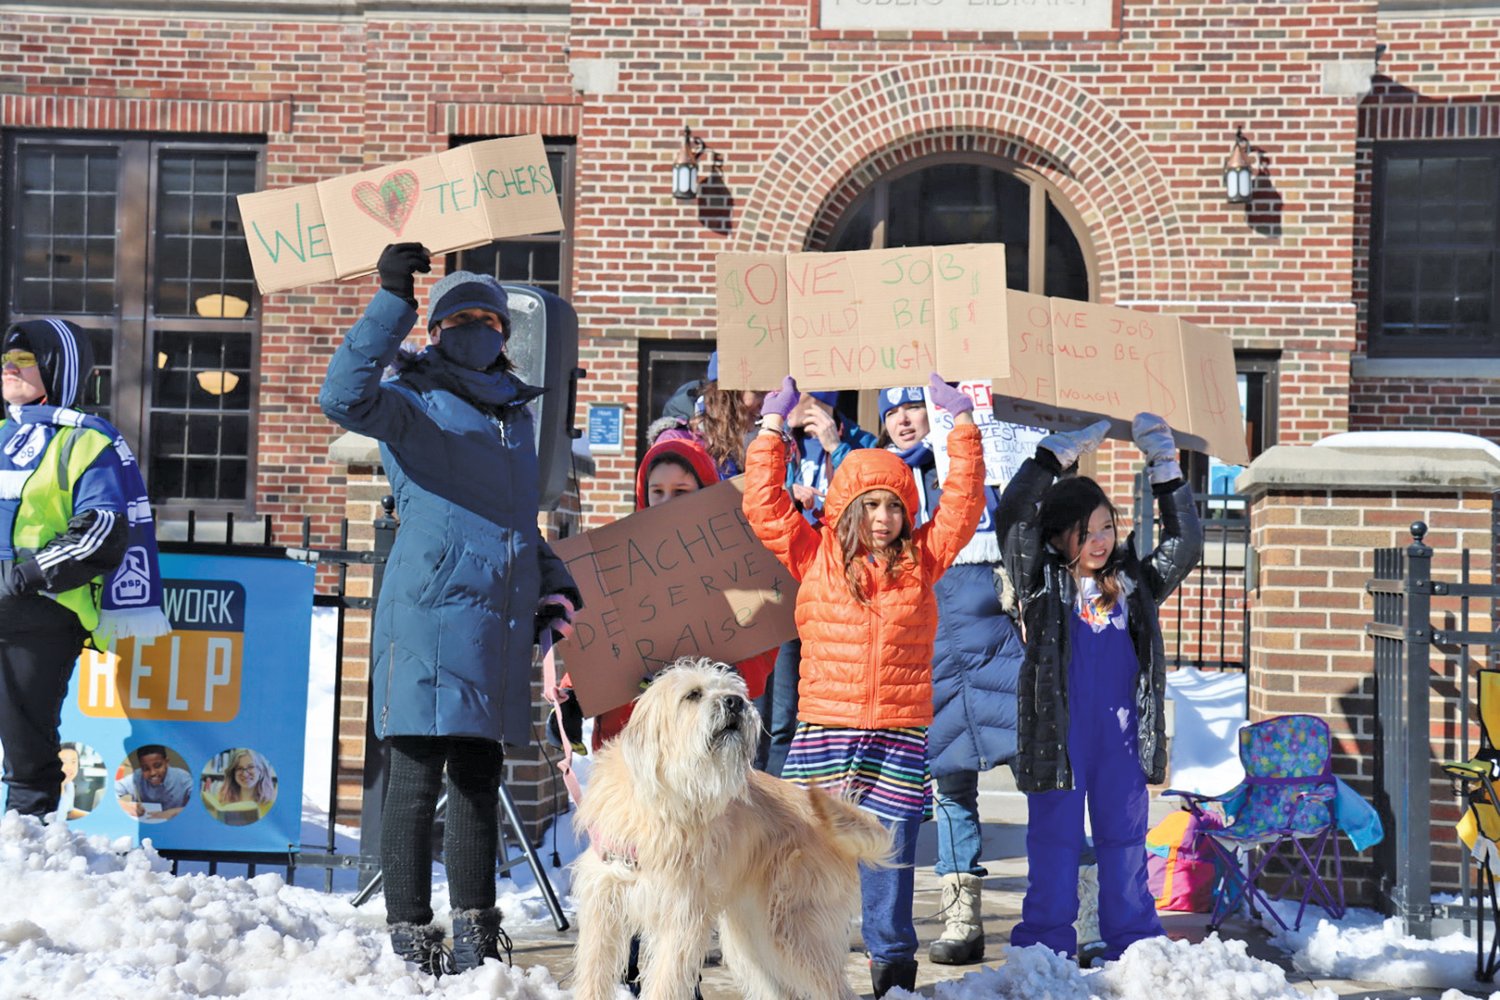 Wendy Ledesma was with children Santiago (age 11) and Noemi (age 9), and Pearl Jones (age 7), students at Green Central, and their dog, Jyn Erso, at Roosevelt on Tuesday, March 8 to stand with educators in Minneapolis. (Photo by Tesha M. Christensen)